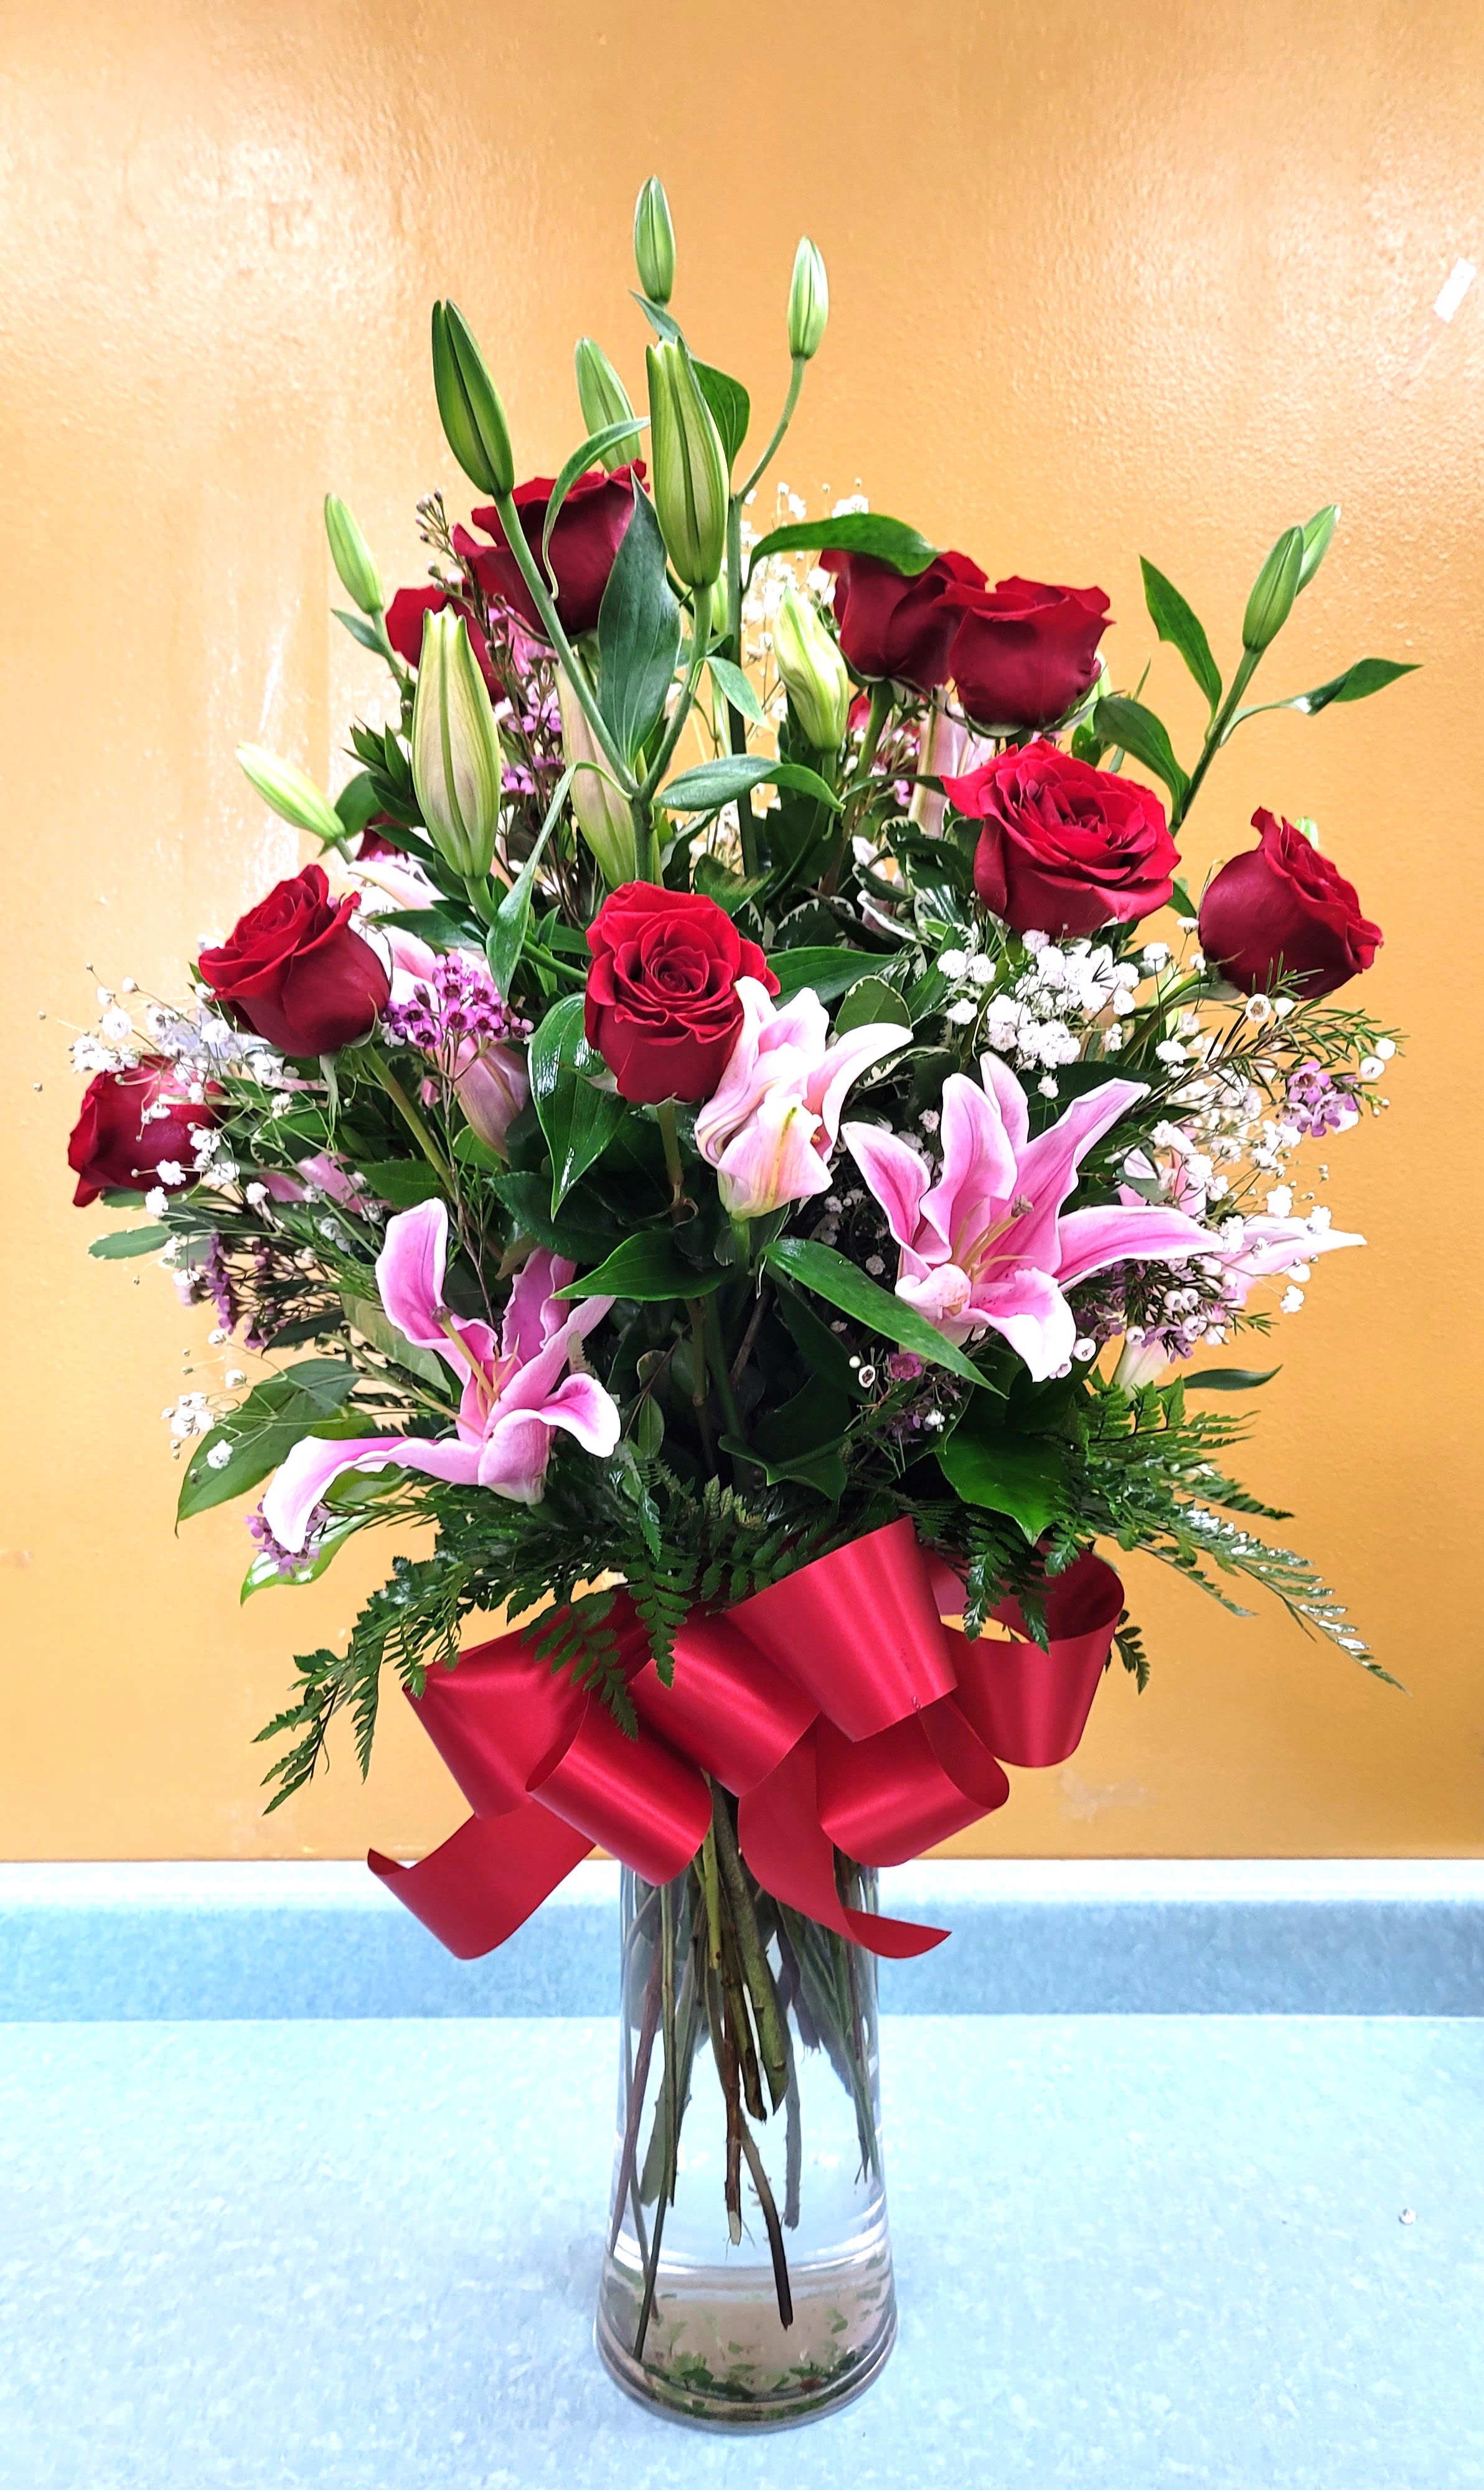 12, 24 OR 36 PREMIUM RED ROSES WITH STARGAZER LILIES  - BEAUTIFUL ROSE ARRANGEMENT WITH STARGAZER LILIES.  YOU CAN ORDER 12, 24 OR 36 ROSES.